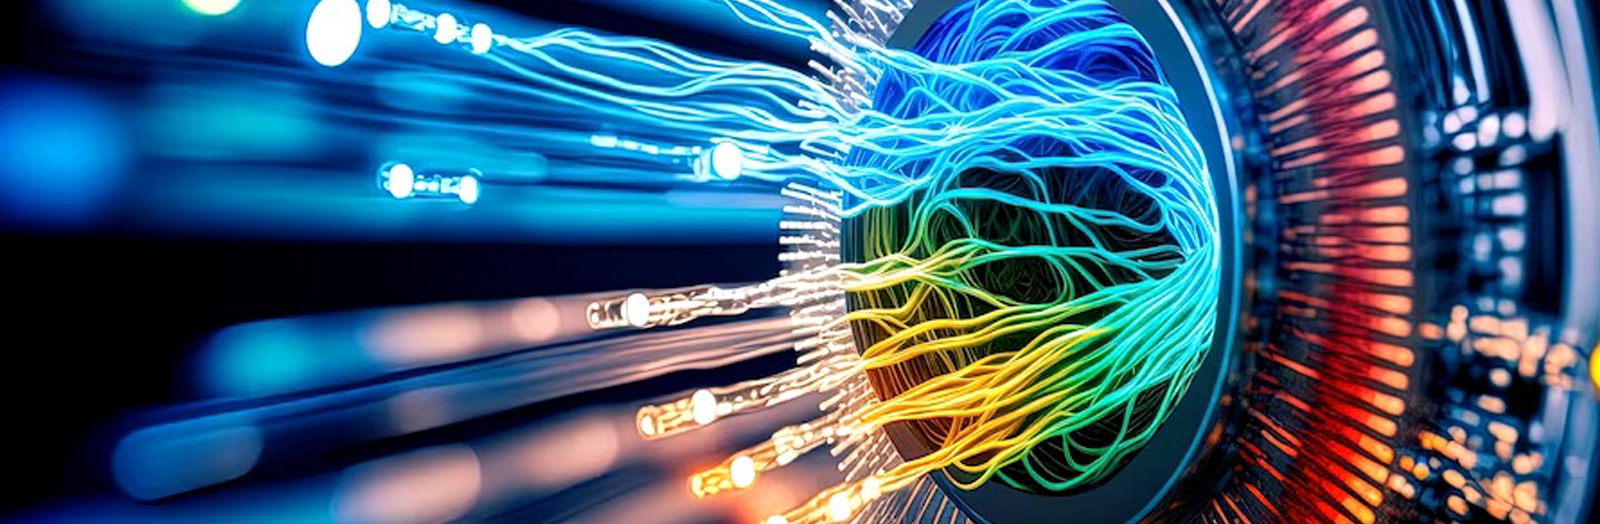 Fiber Optic, Structured Cabling, CCTV Installation & Wi-Fi Solutions in Beaumont, California